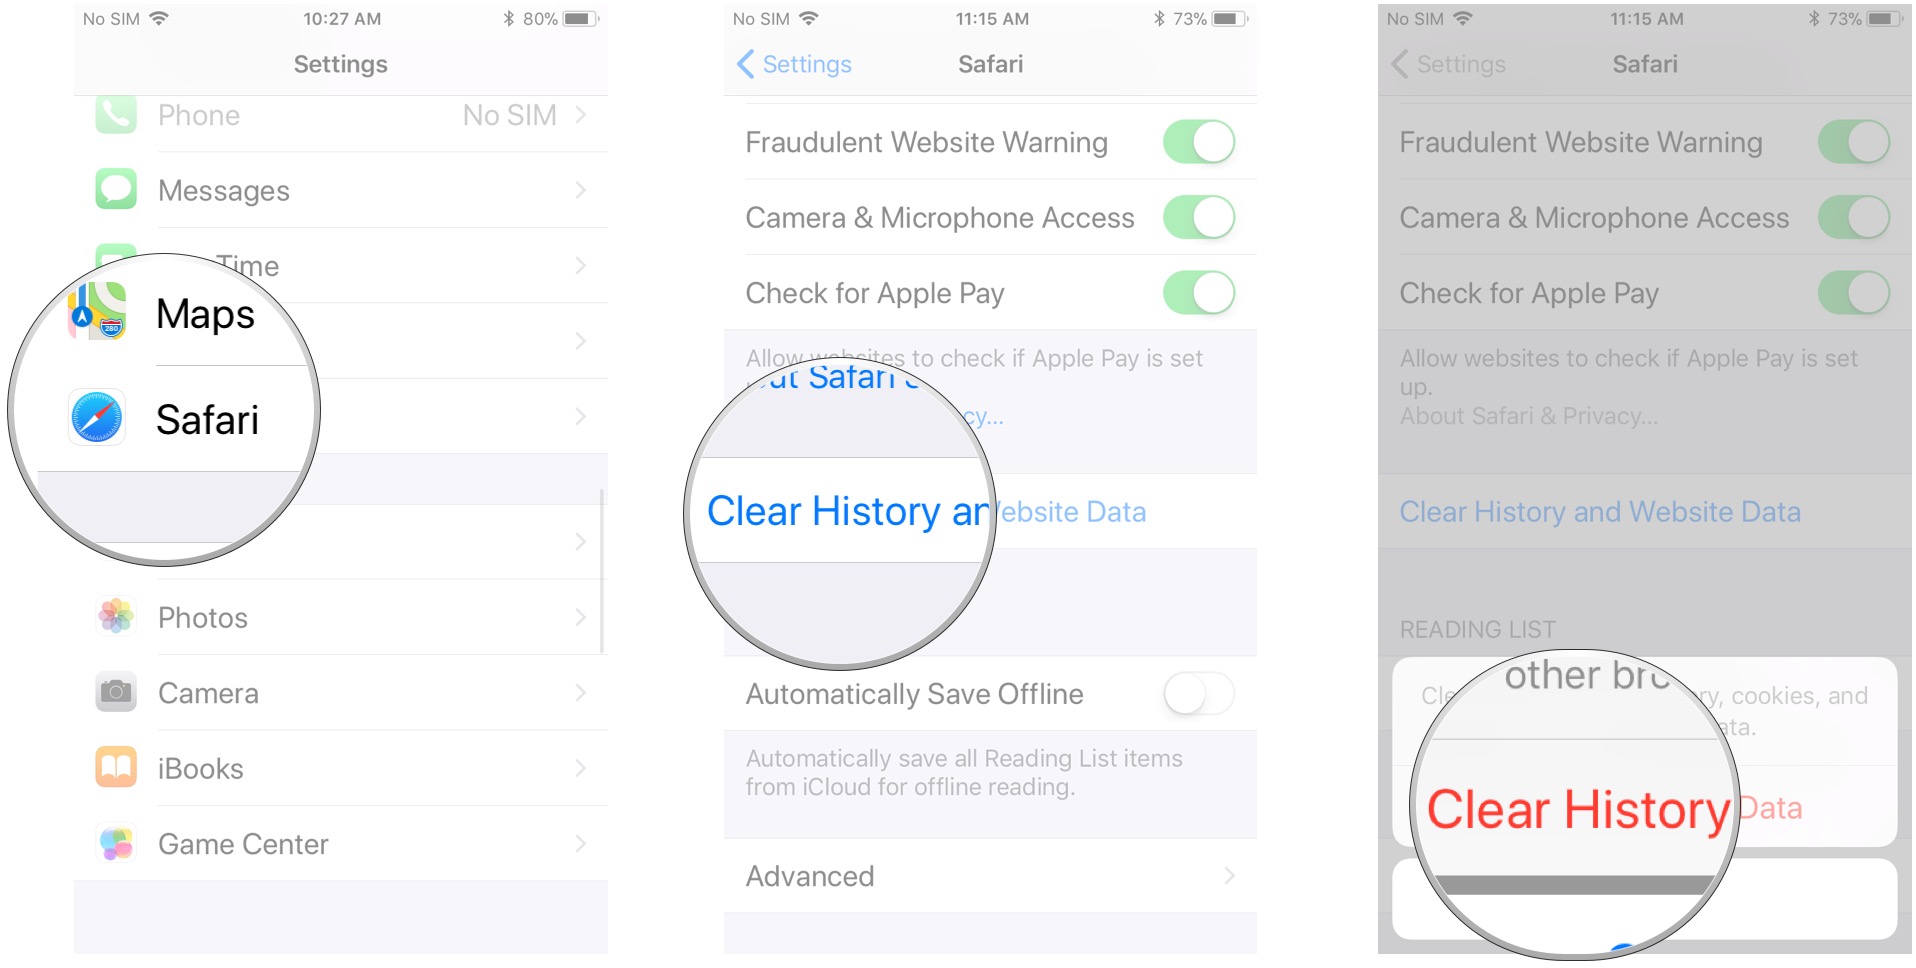 Tap Safari, tap Clear History and Website Data, tap Clear History and Data